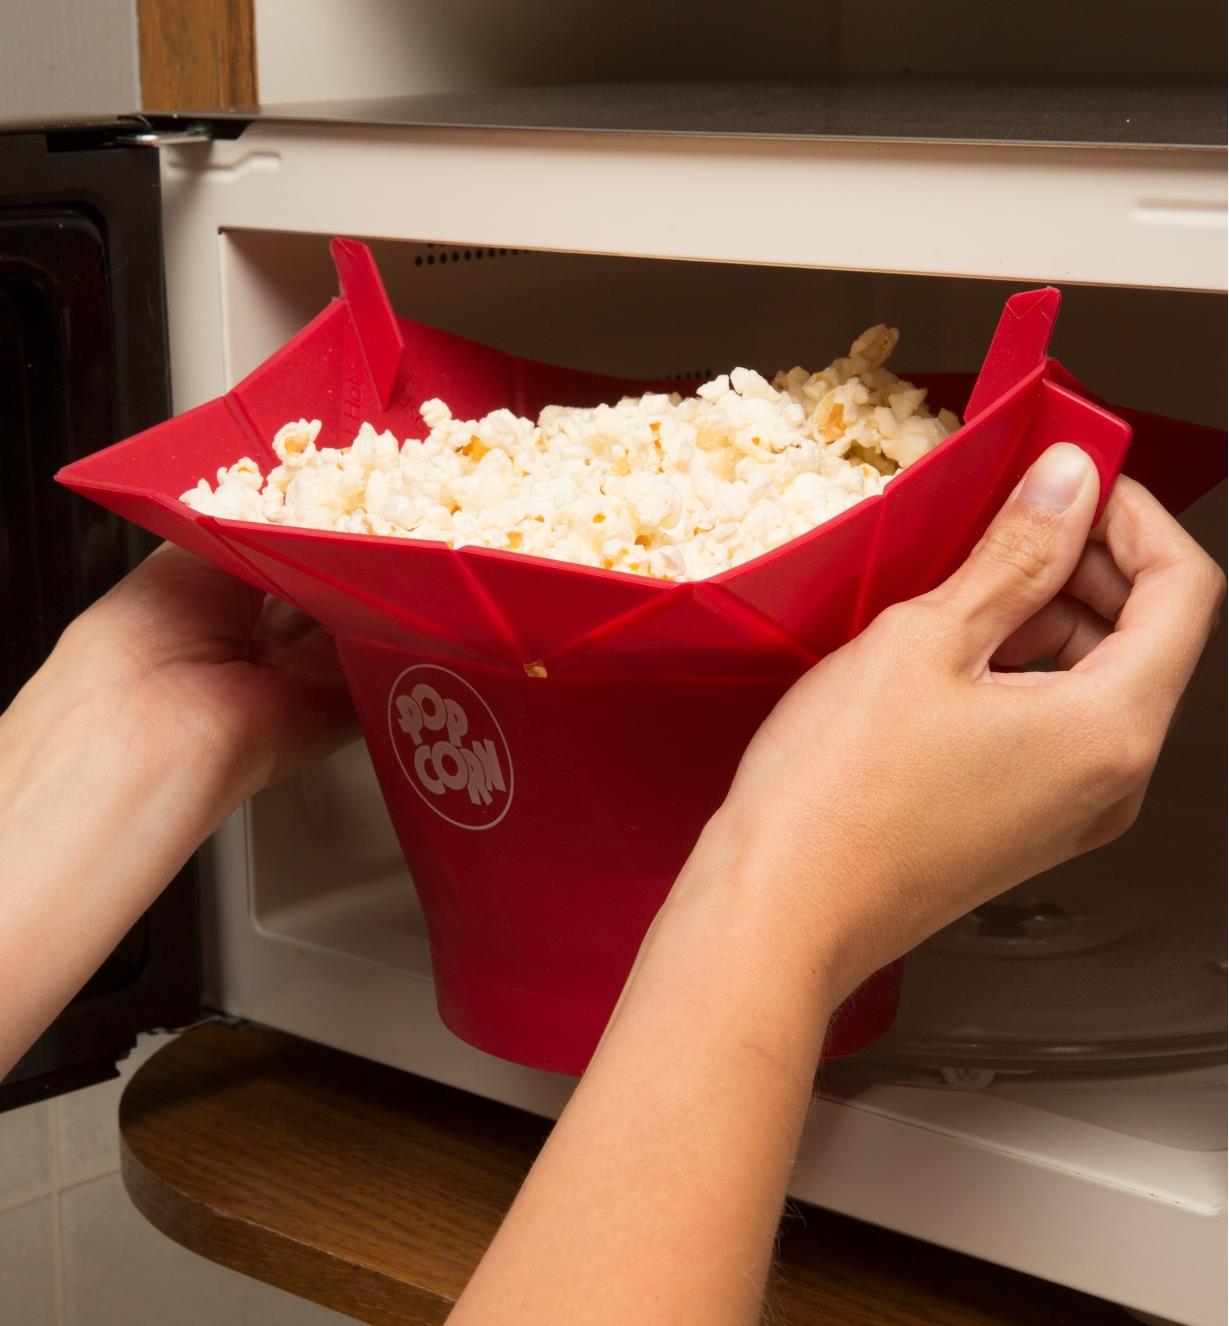 Removing the Poptop Popcorn Popper filled with popped popcorn from the microwave